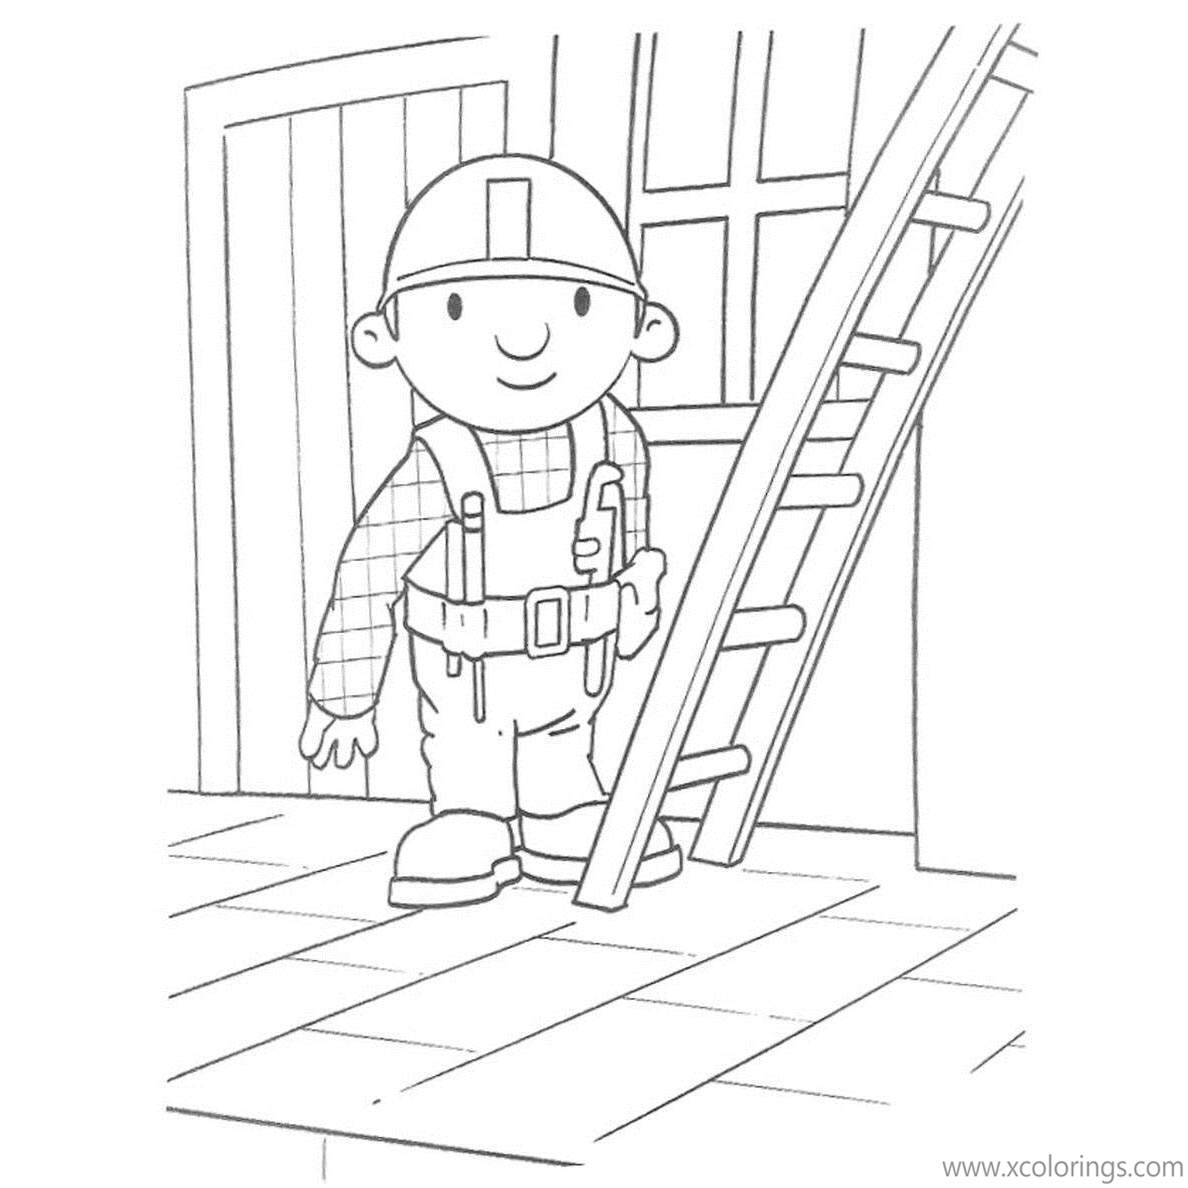 Free Bob The Builder Coloring Pages Bob Climbing the Ladder printable